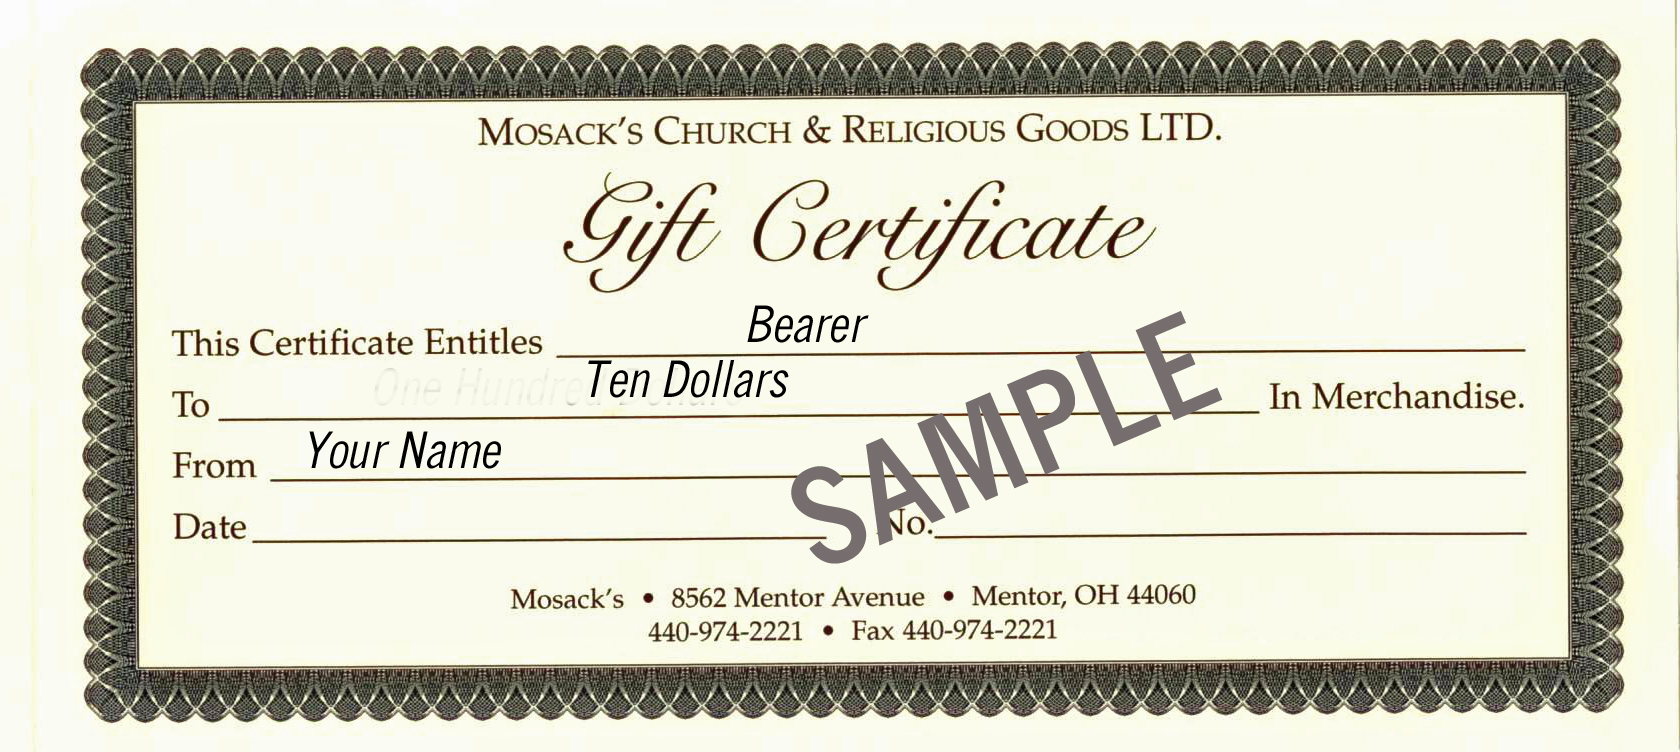 MOSACK'S $10 Gift Certificate